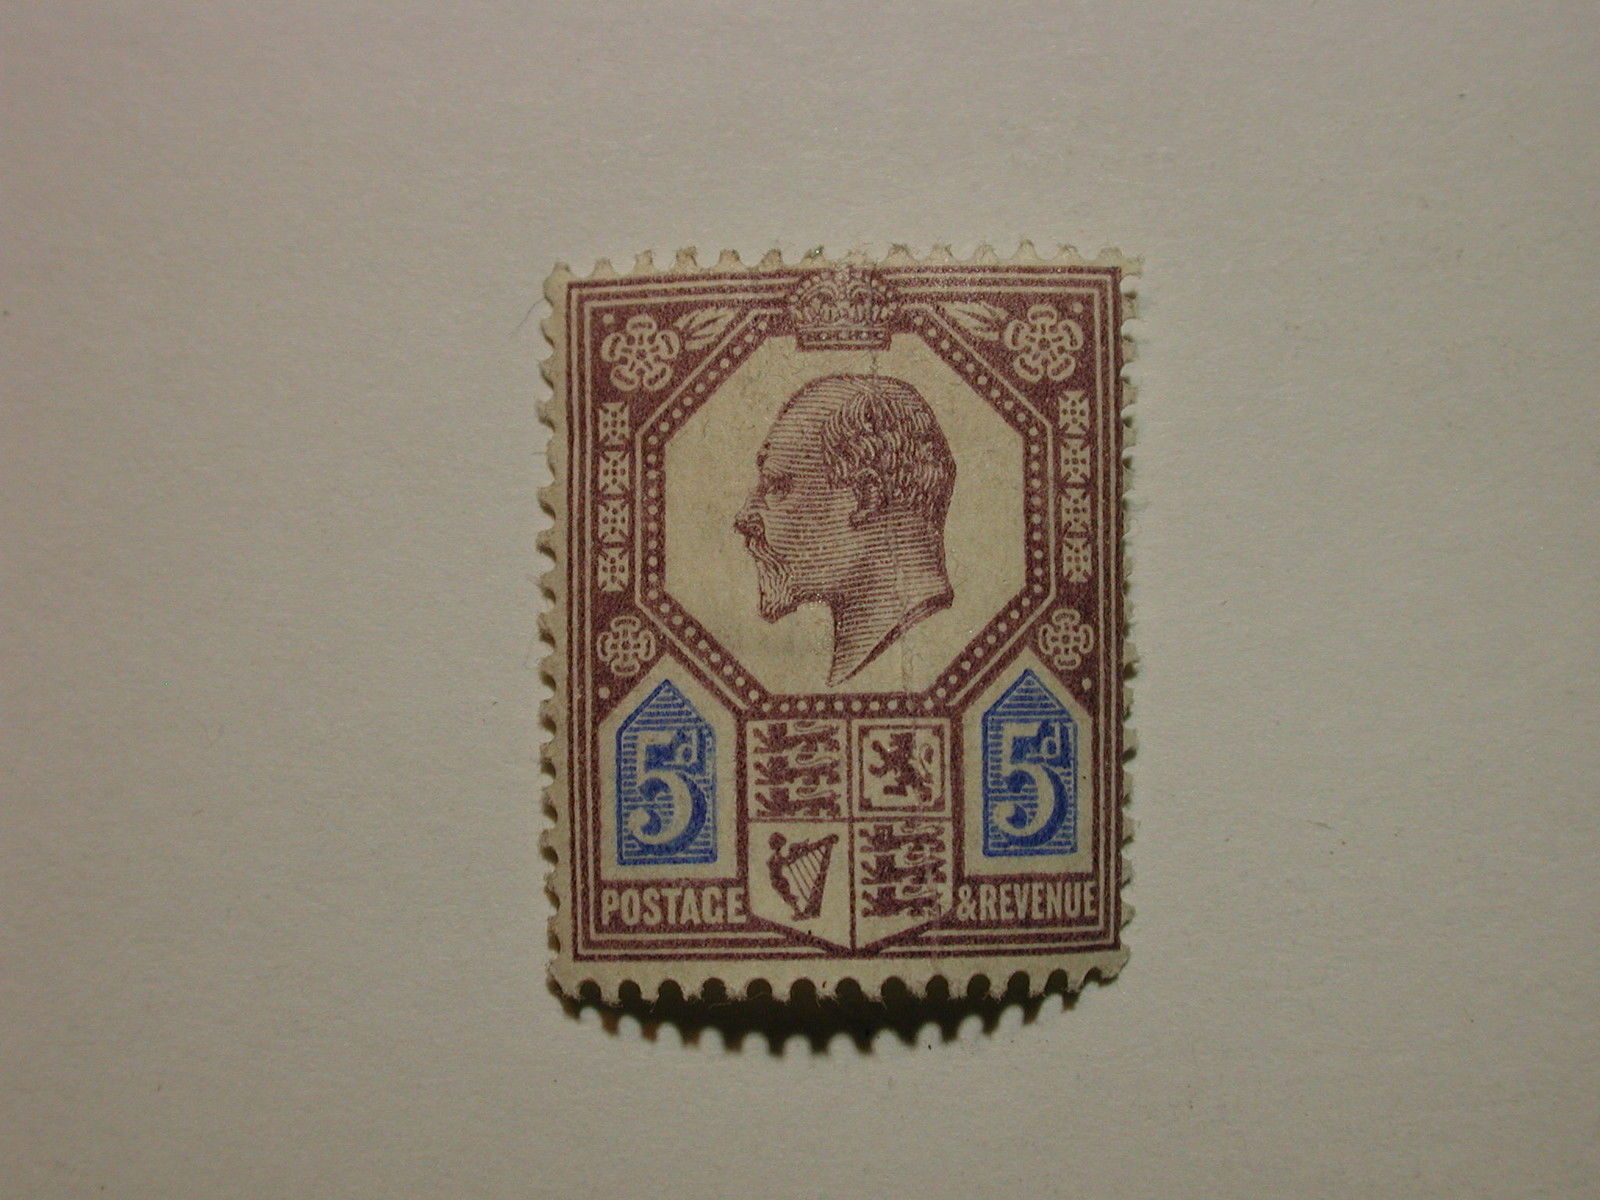 Great Britain Scott #134 Hinged Good Sharp Color in Great Condition